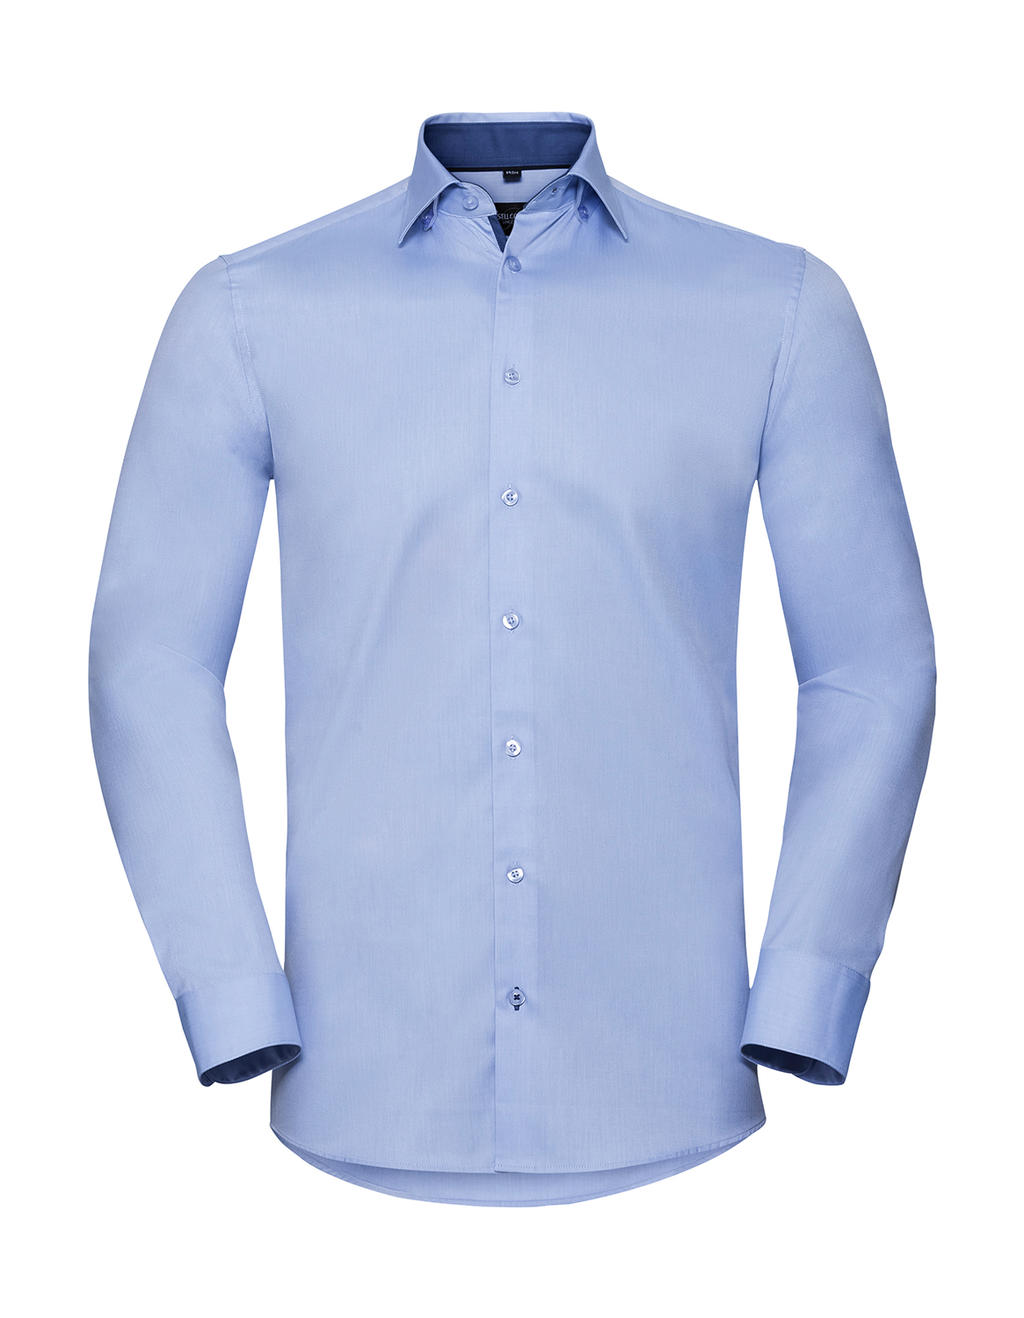  Tailored Contrast Herringbone Shirt LS in Farbe Light Blue/Mid Blue/Bright Navy